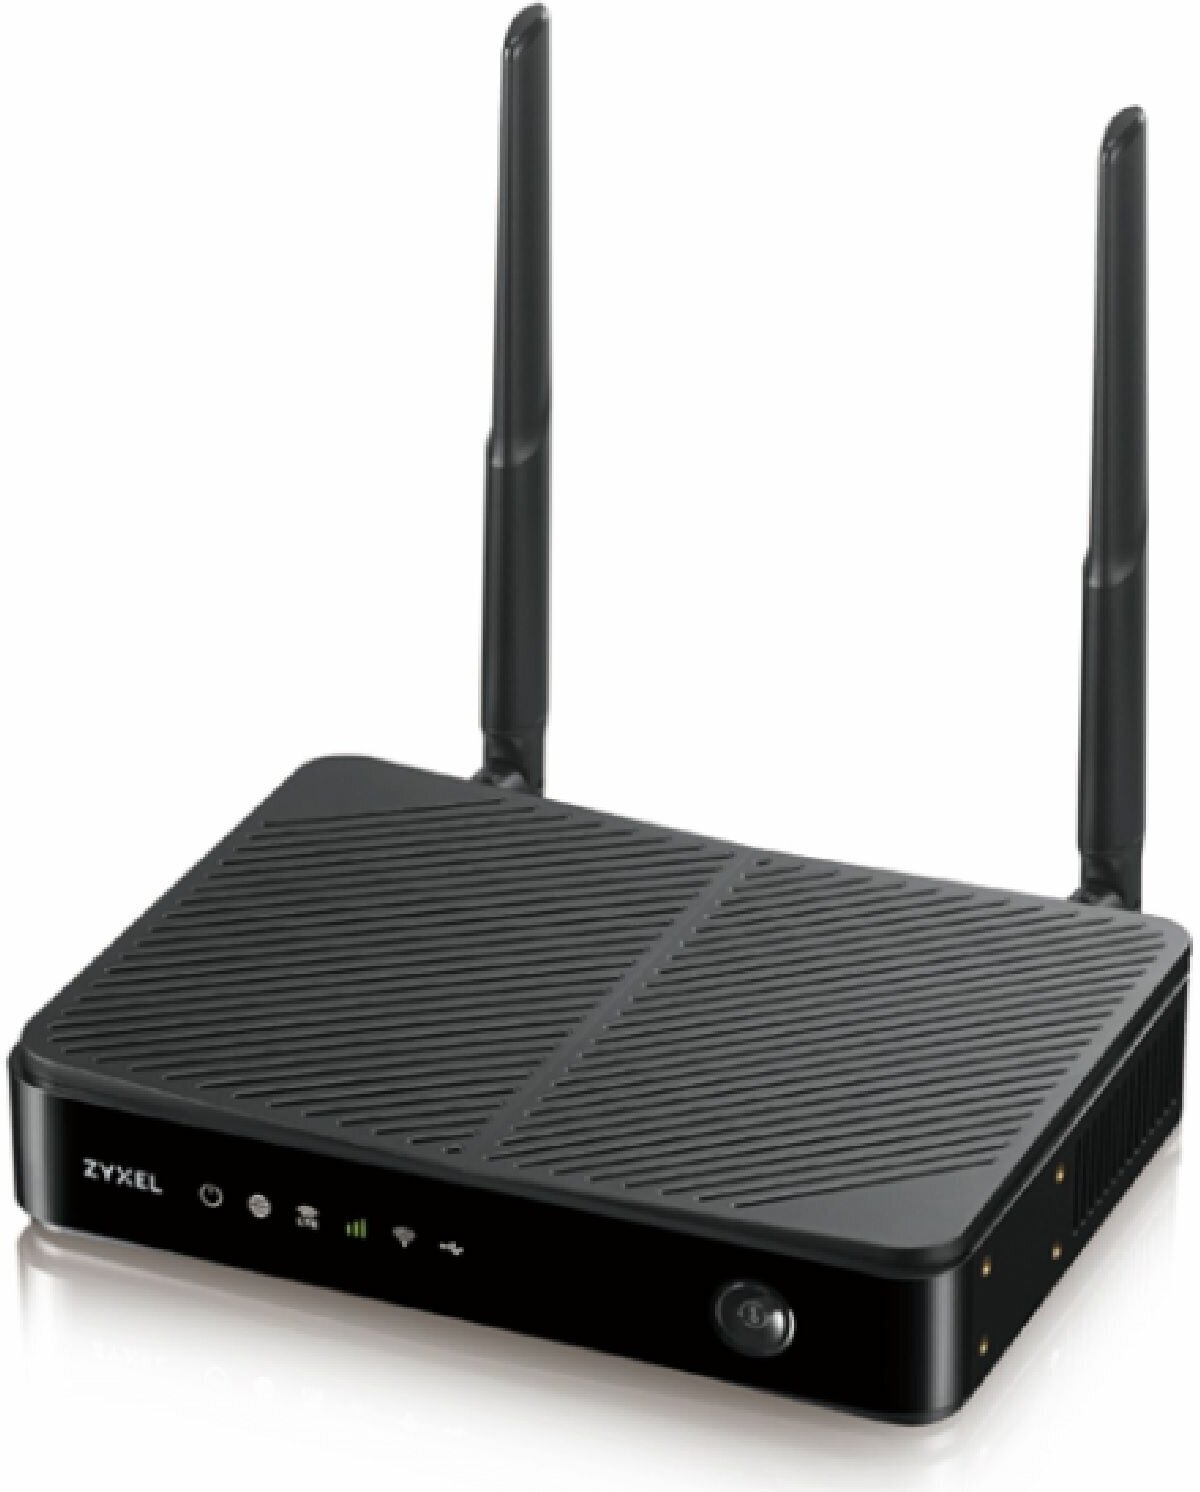 Маршрутизатор ZYXEL NebulaFlex Pro LTE3301-PLUS LTE Cat.6 Wi-Fi router (SIM inserted) 1xLAN/WAN GE 3x LAN GE 802.11ac (2.4 and 5 GHz) up to